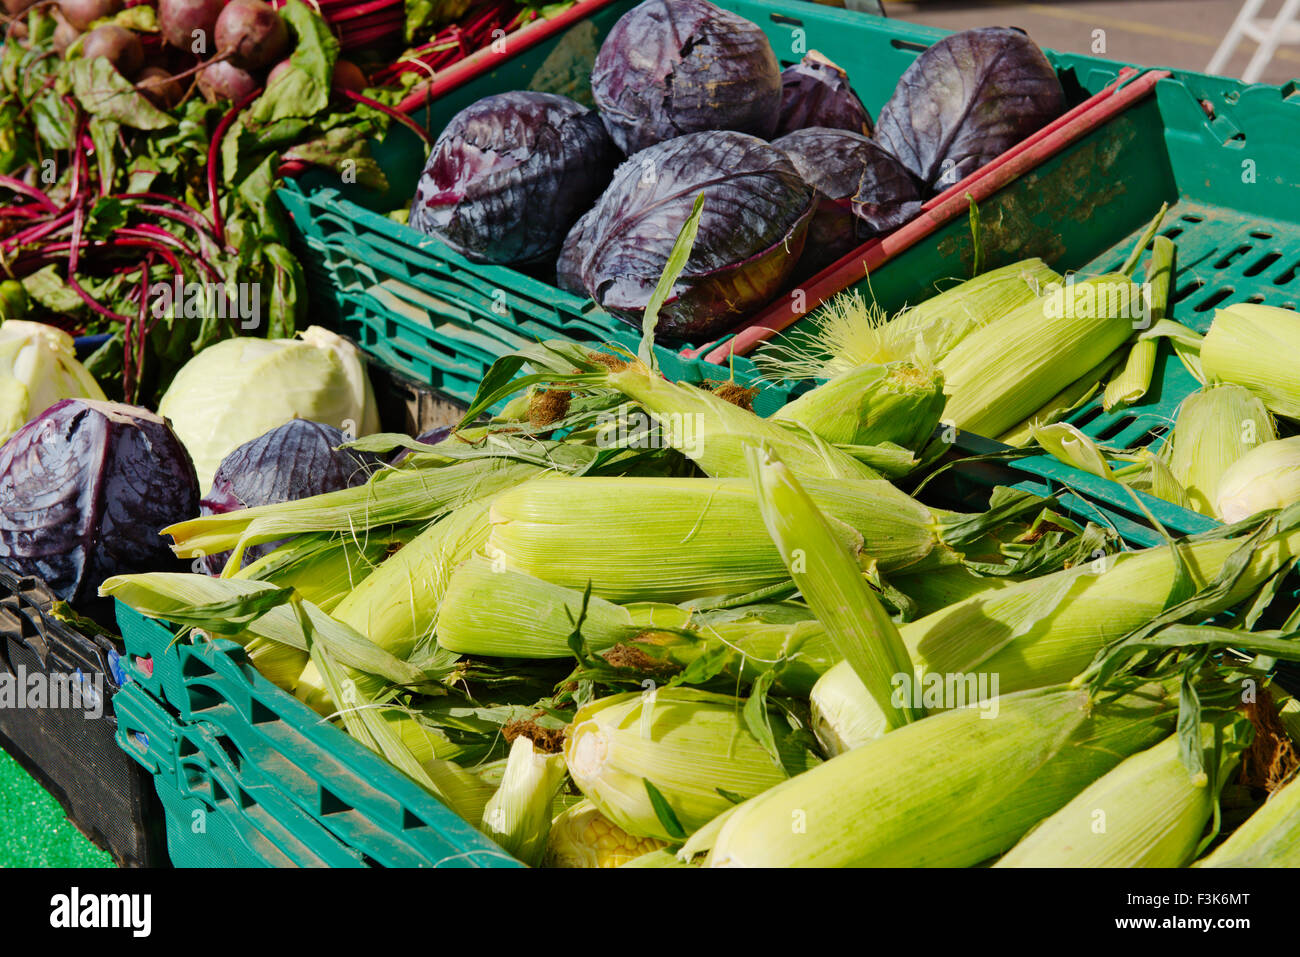 Vegetables for sale in outdoor market, England Stock Photo